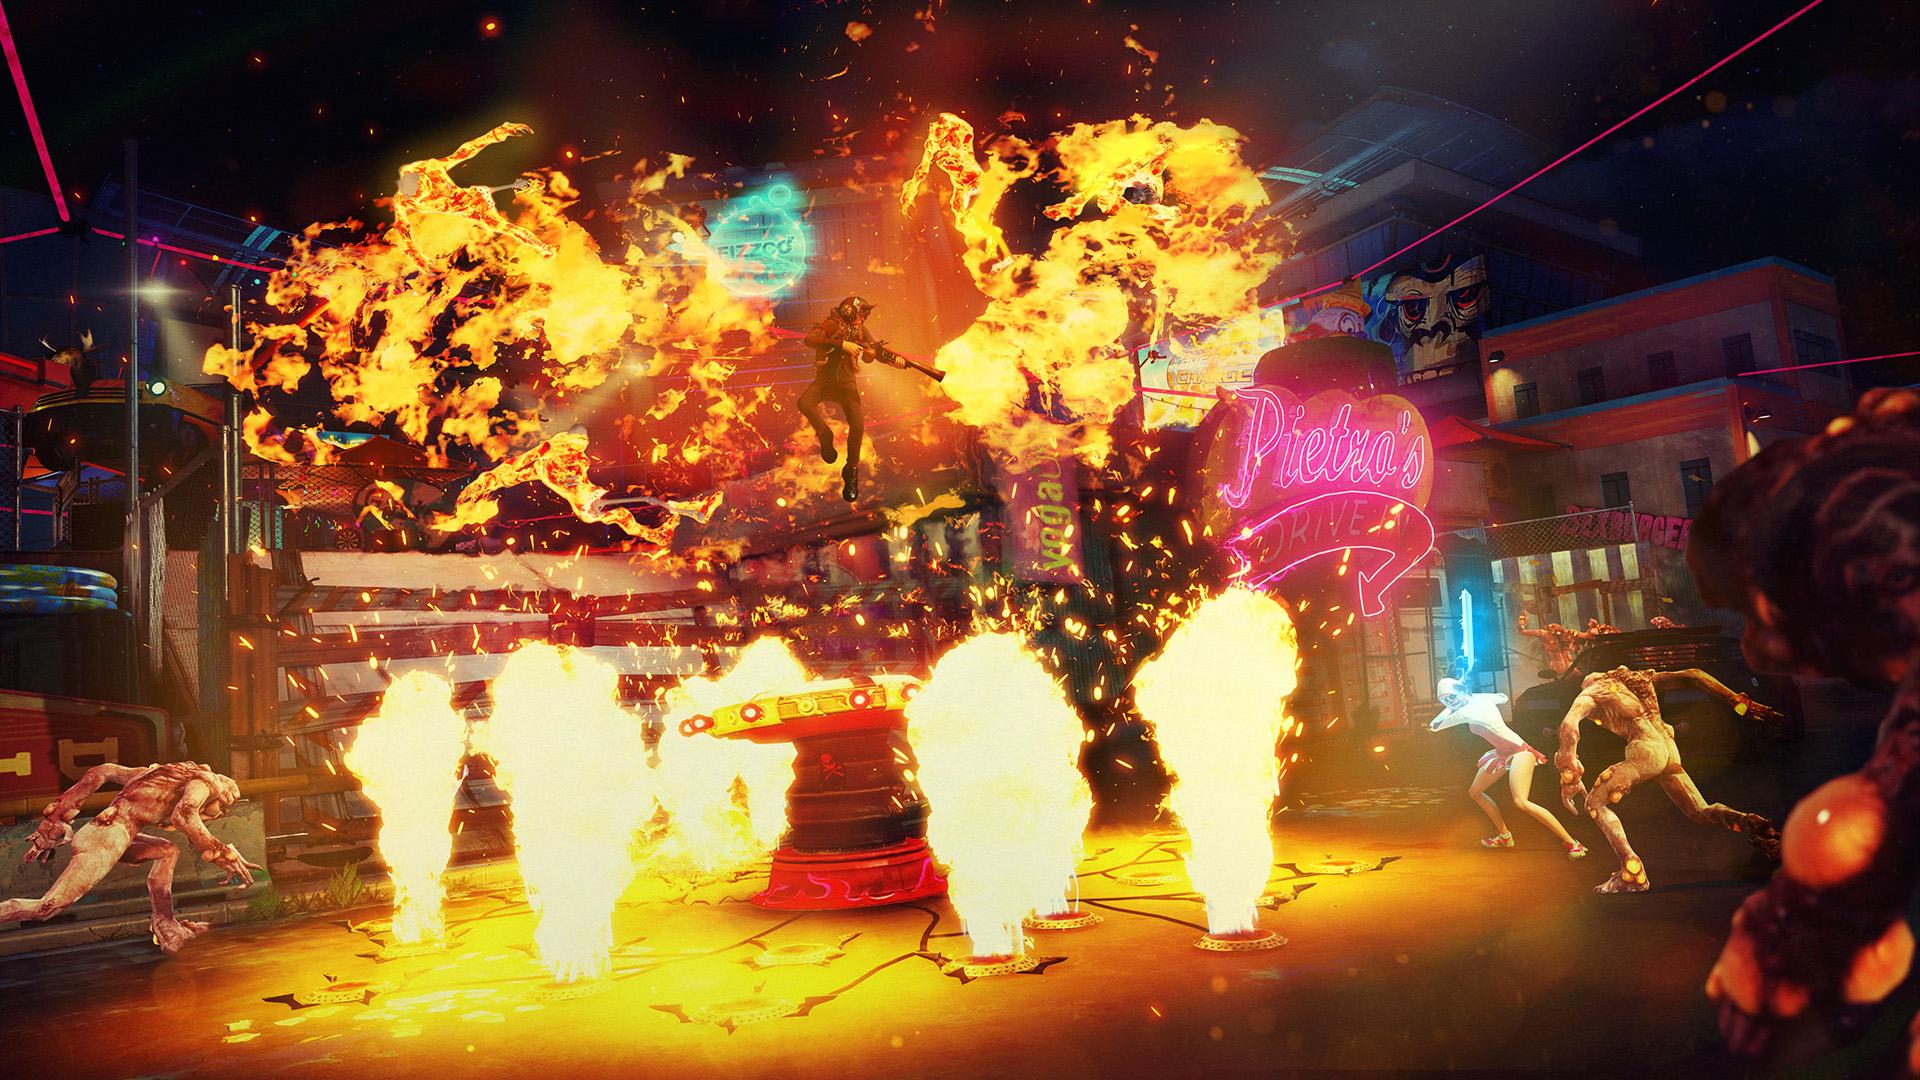 Join the 'Chaos Squad' in Sunset Overdrive's multiplayer trailer